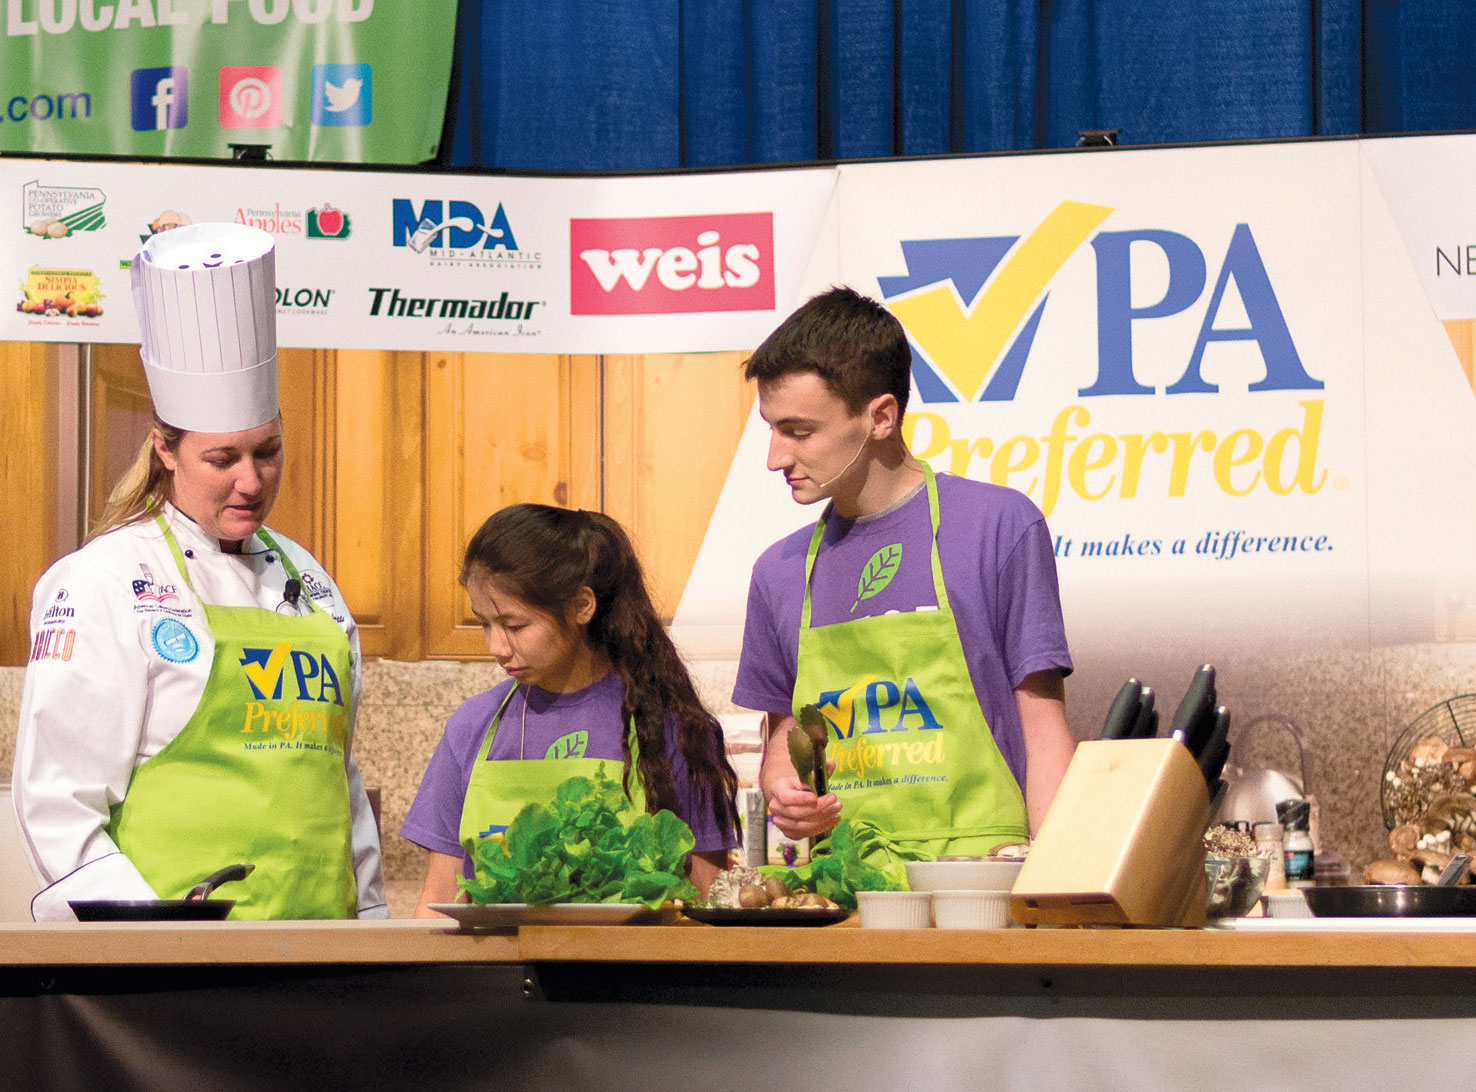 Students from the L.E.A.F. youth leadership program join Chef Autumn Patti on the Culinary Connections stage